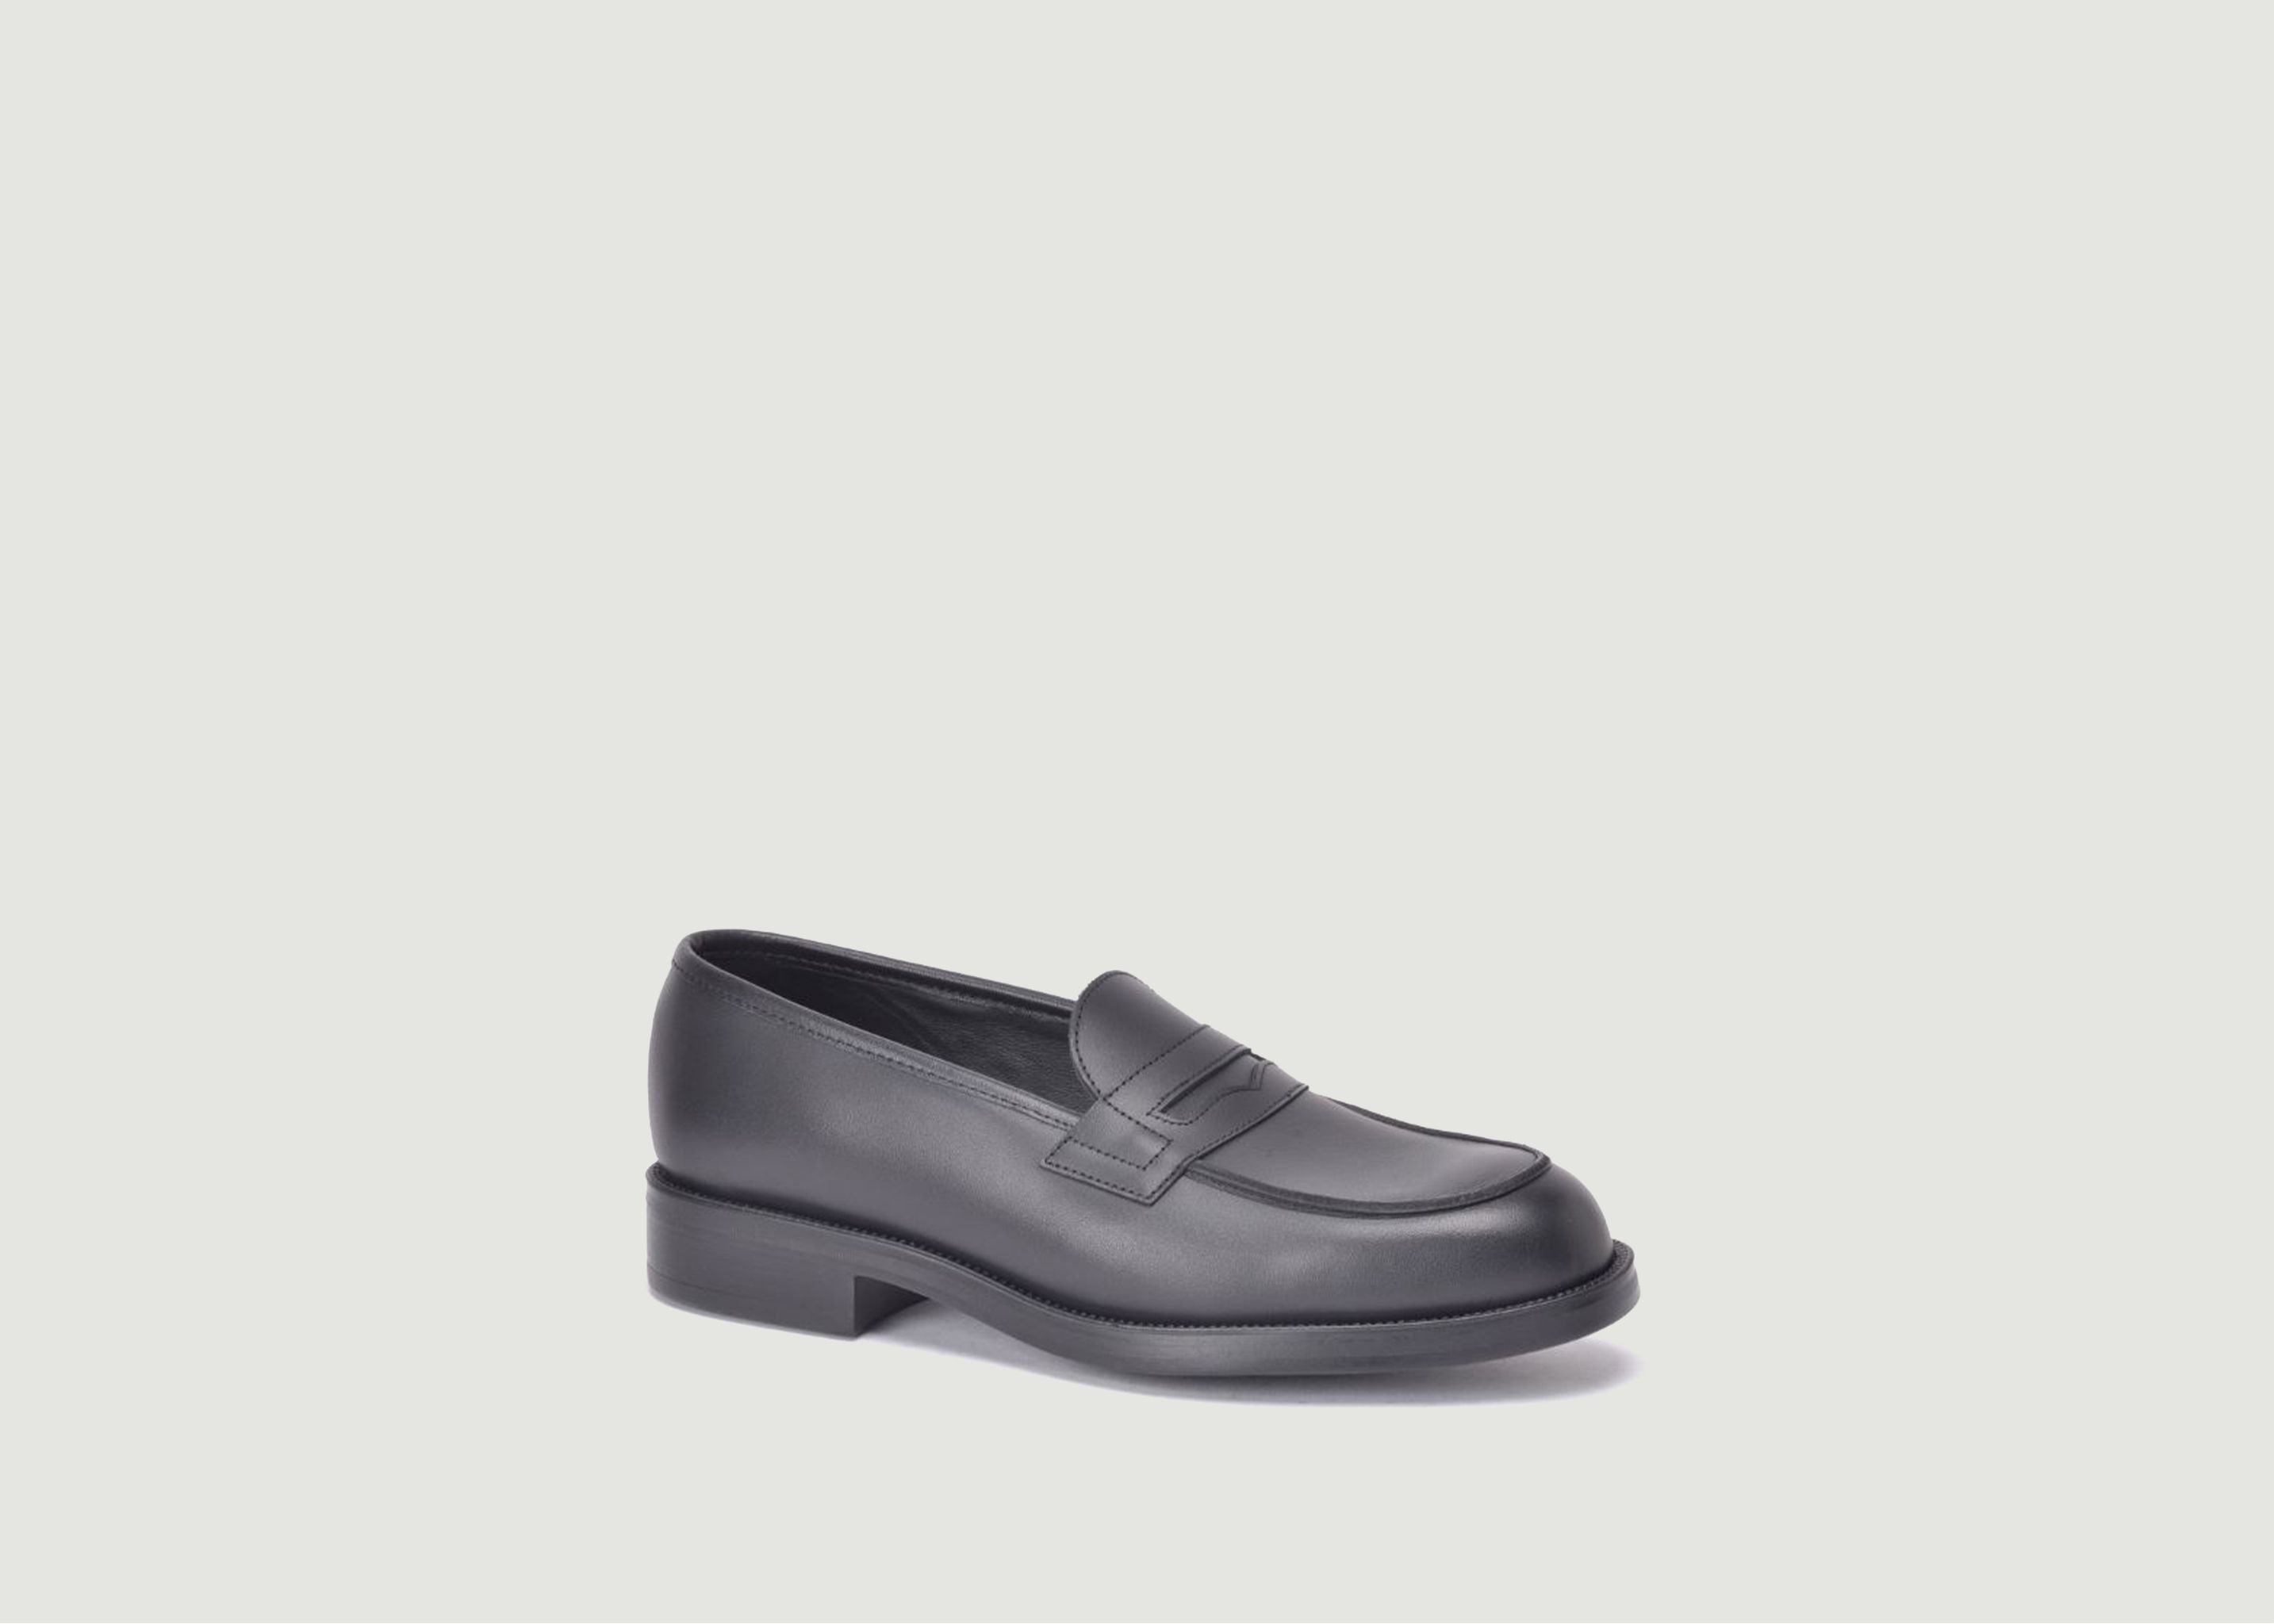 Dalior Loafers 2 - Kleman